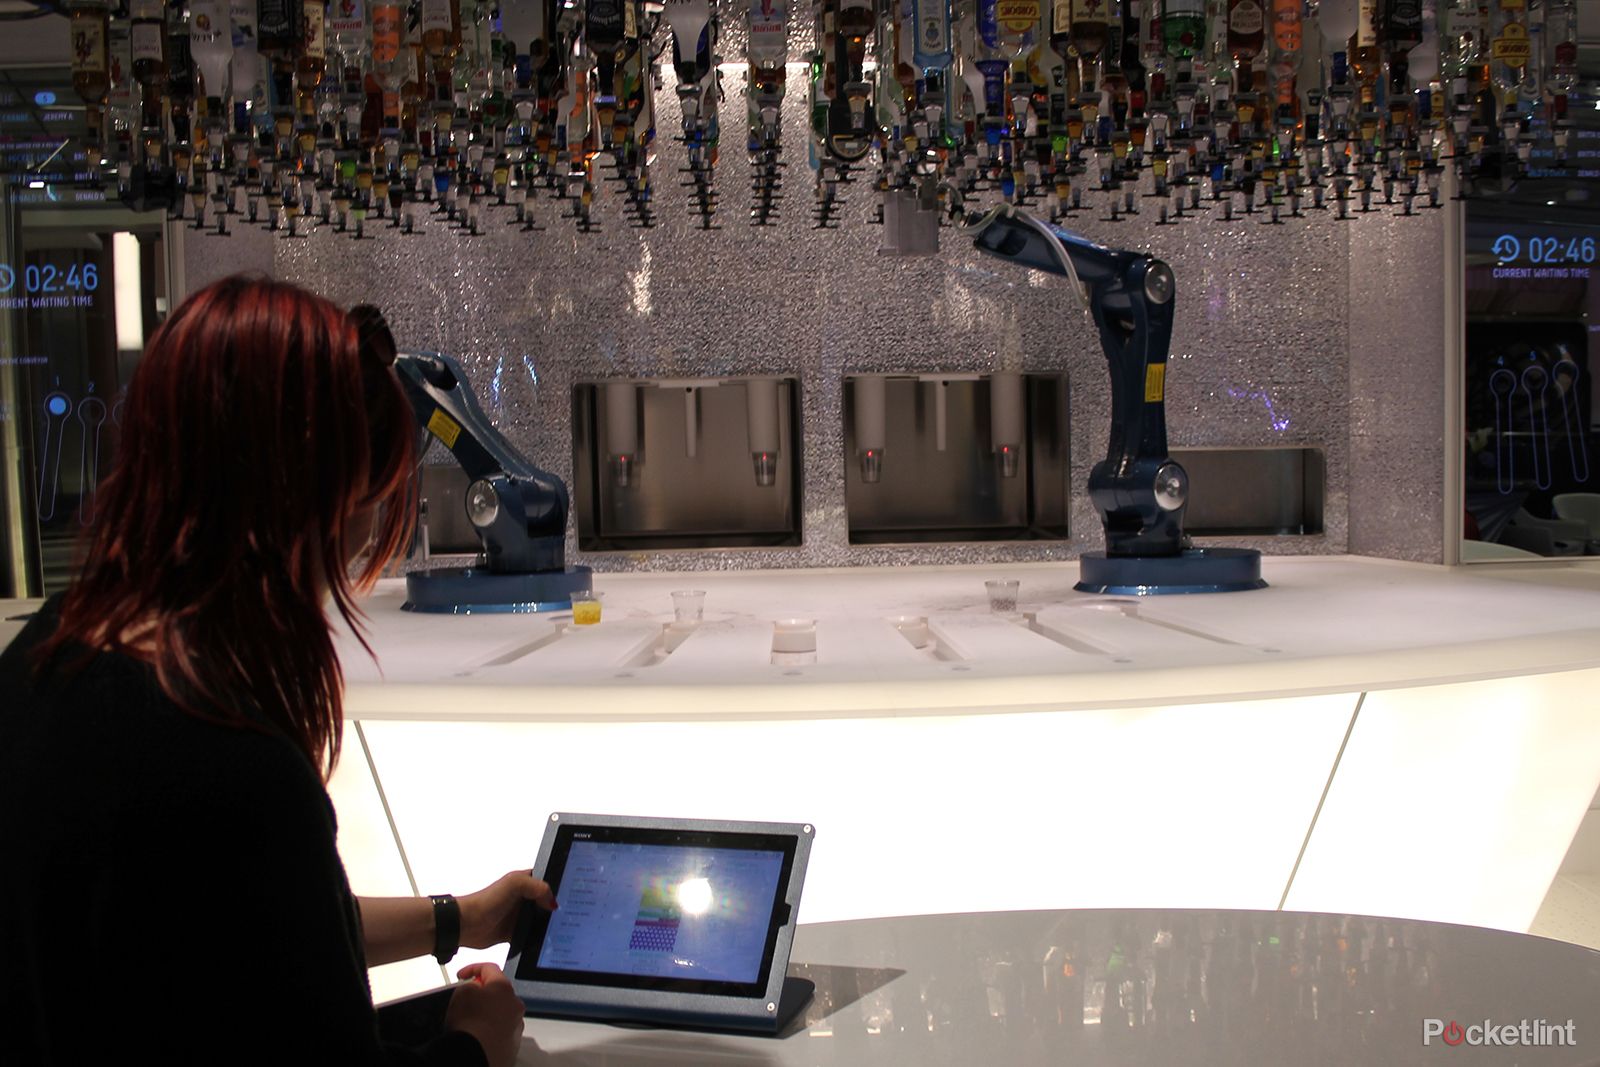 bionic bar is the future robot bartenders at your service image 1